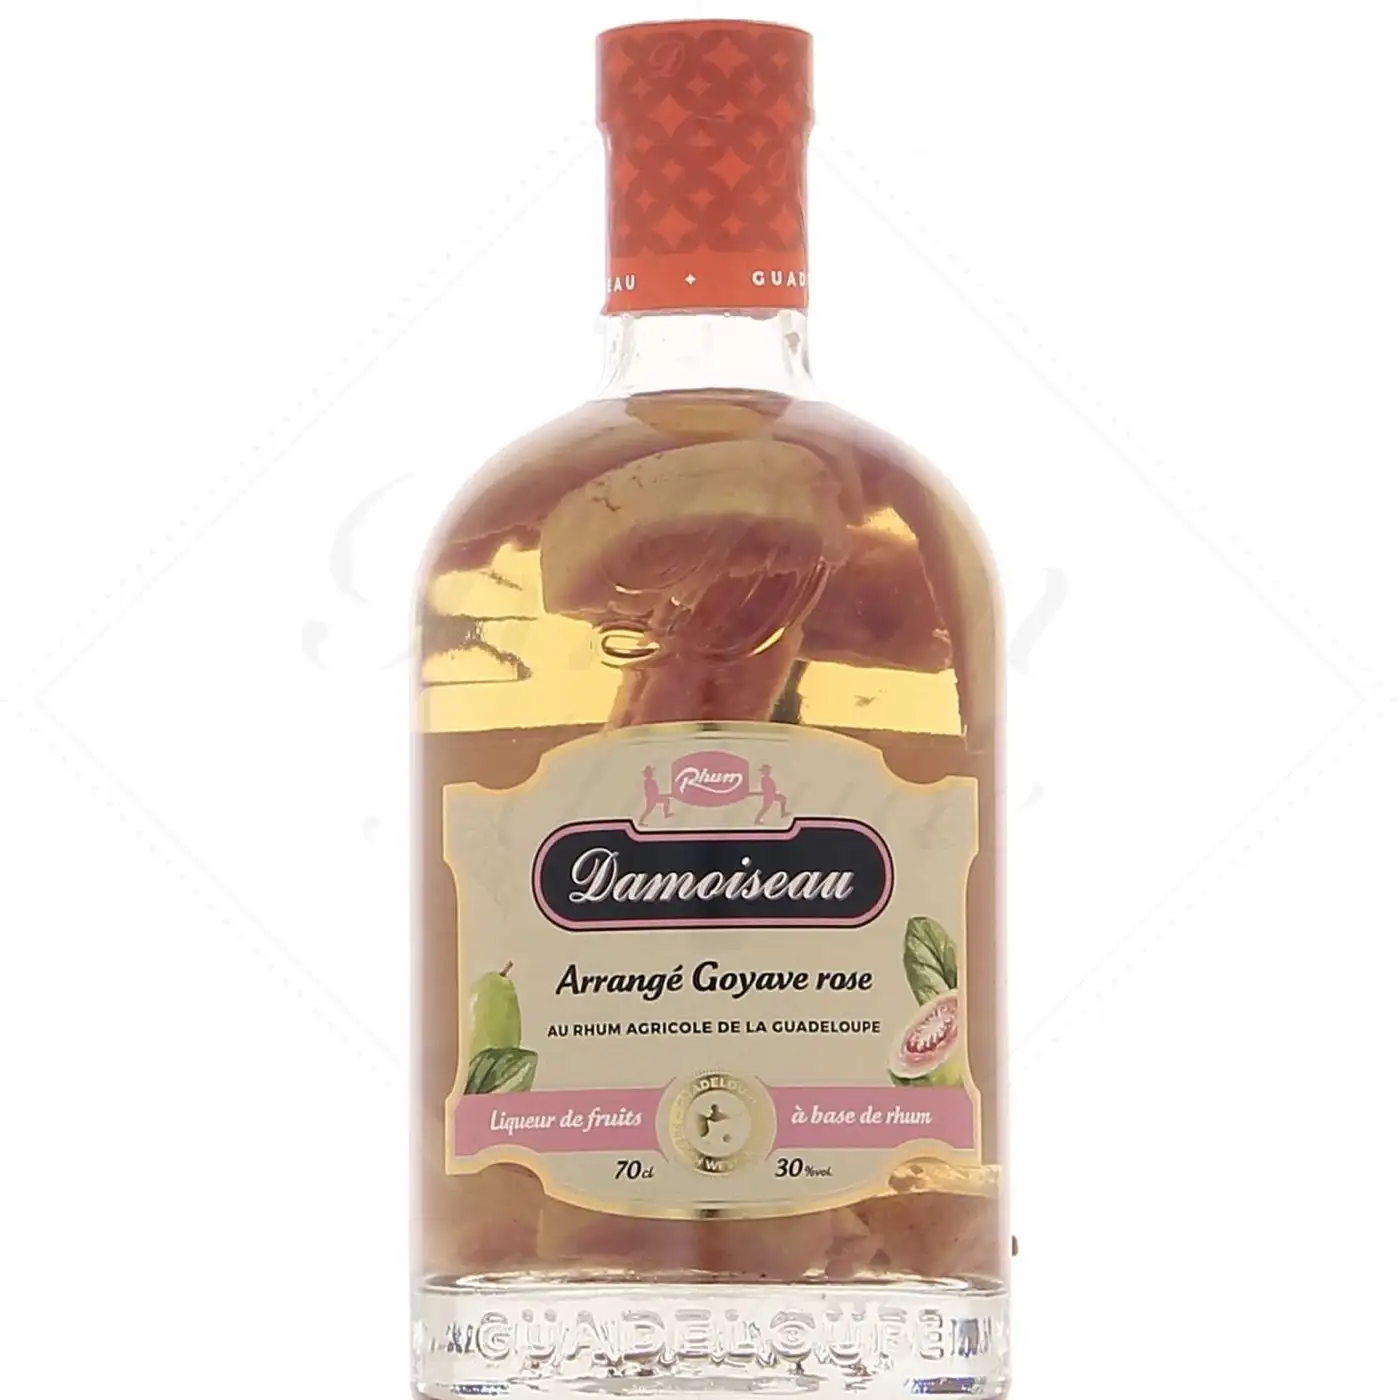 Image of the front of the bottle of the rum Les Arrangés Goyave Rose